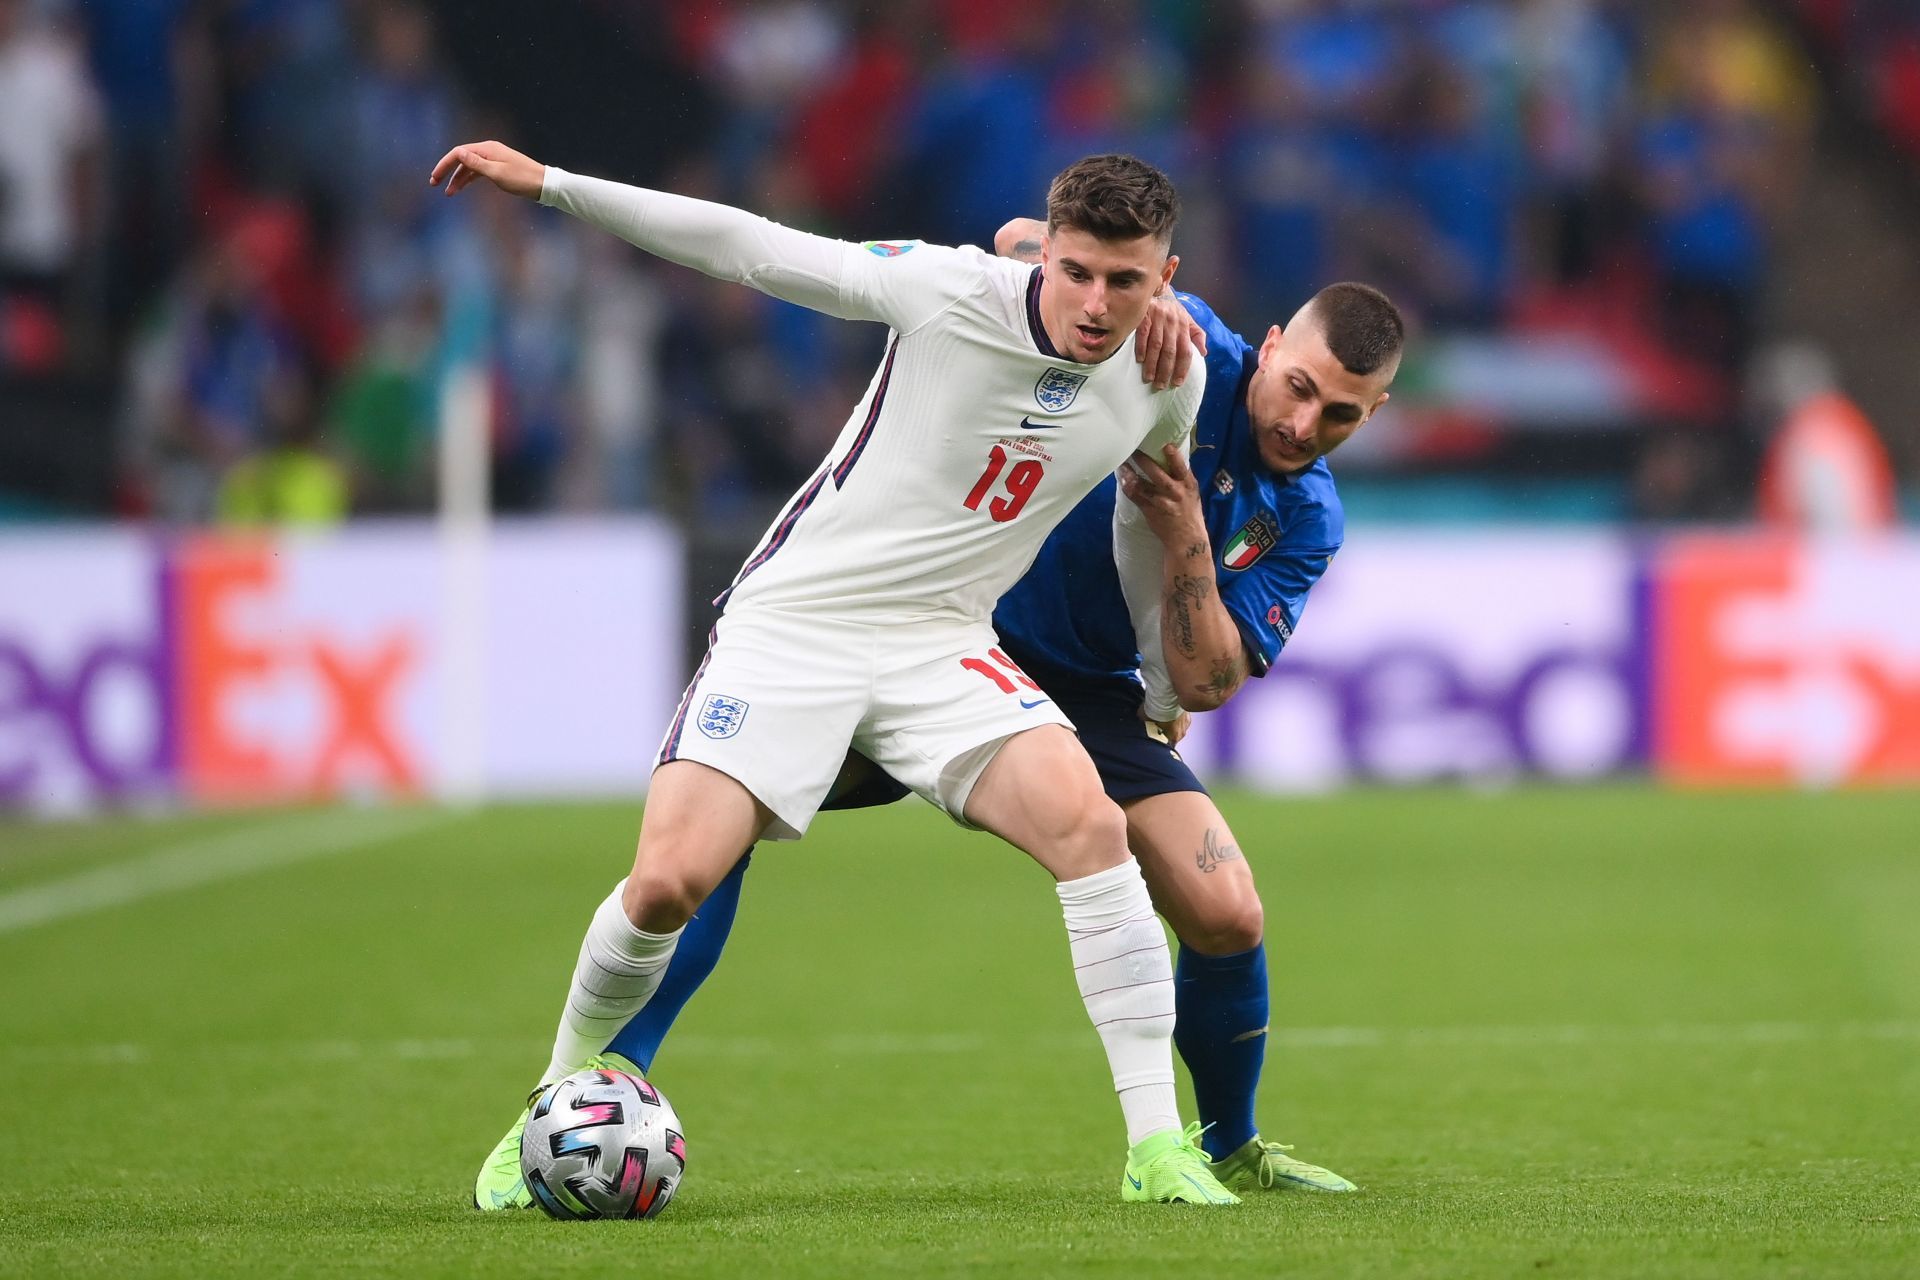 Chelsea star Mount in action for England